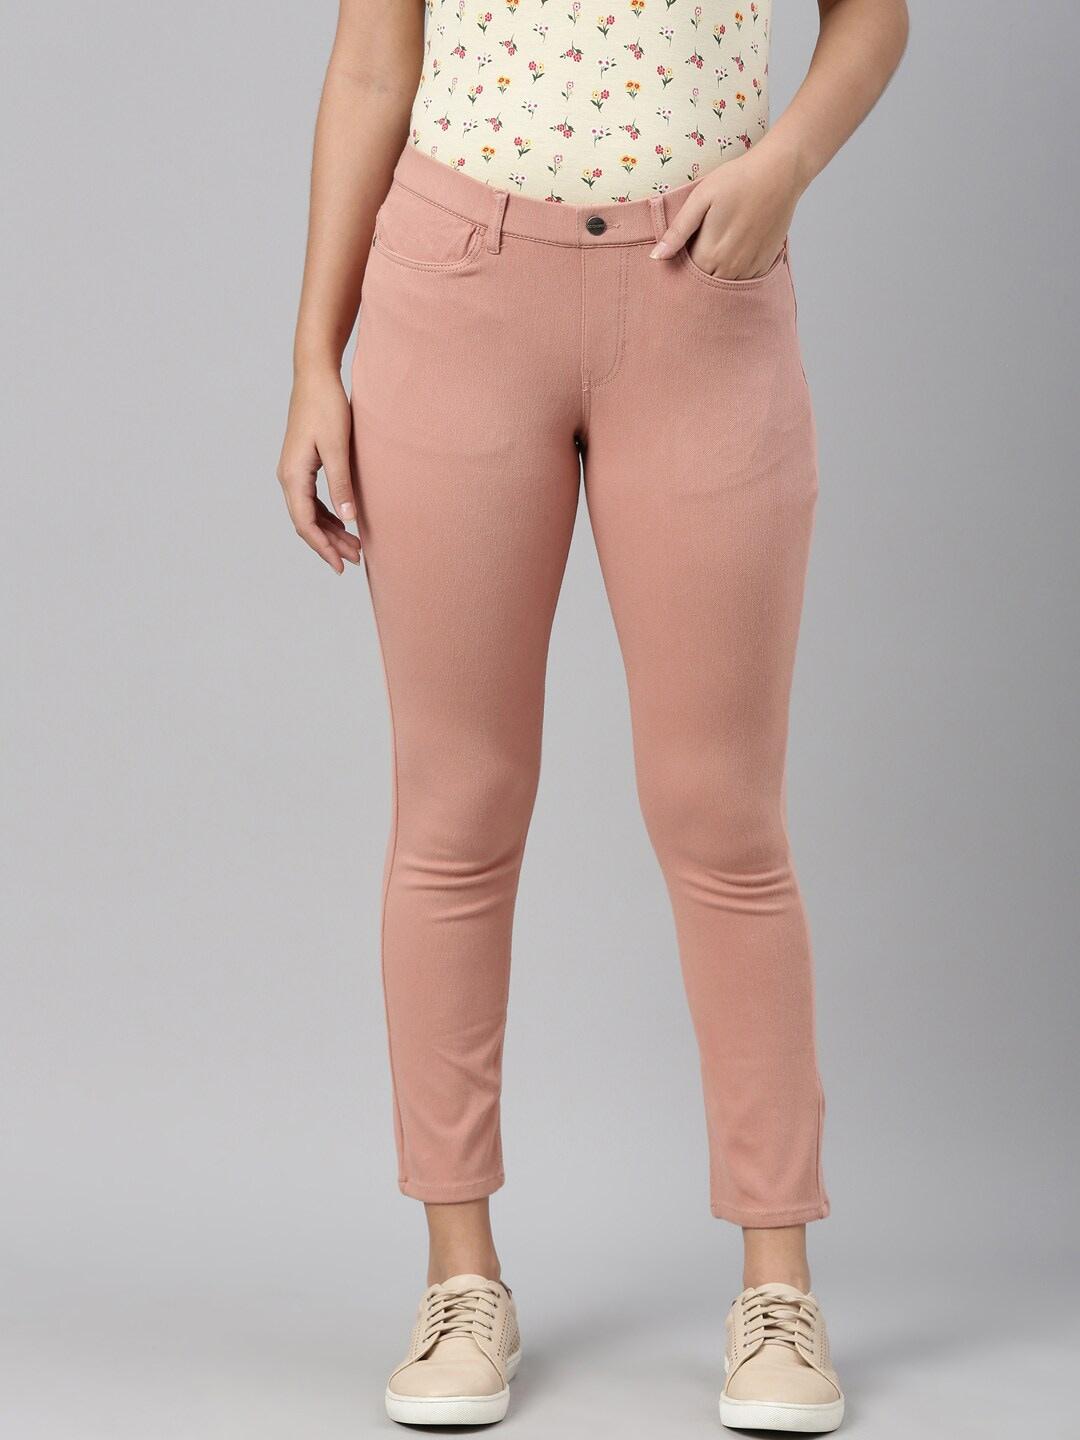 Go Colors Women Pink Solid Slim-Fit Cropped Jeggings